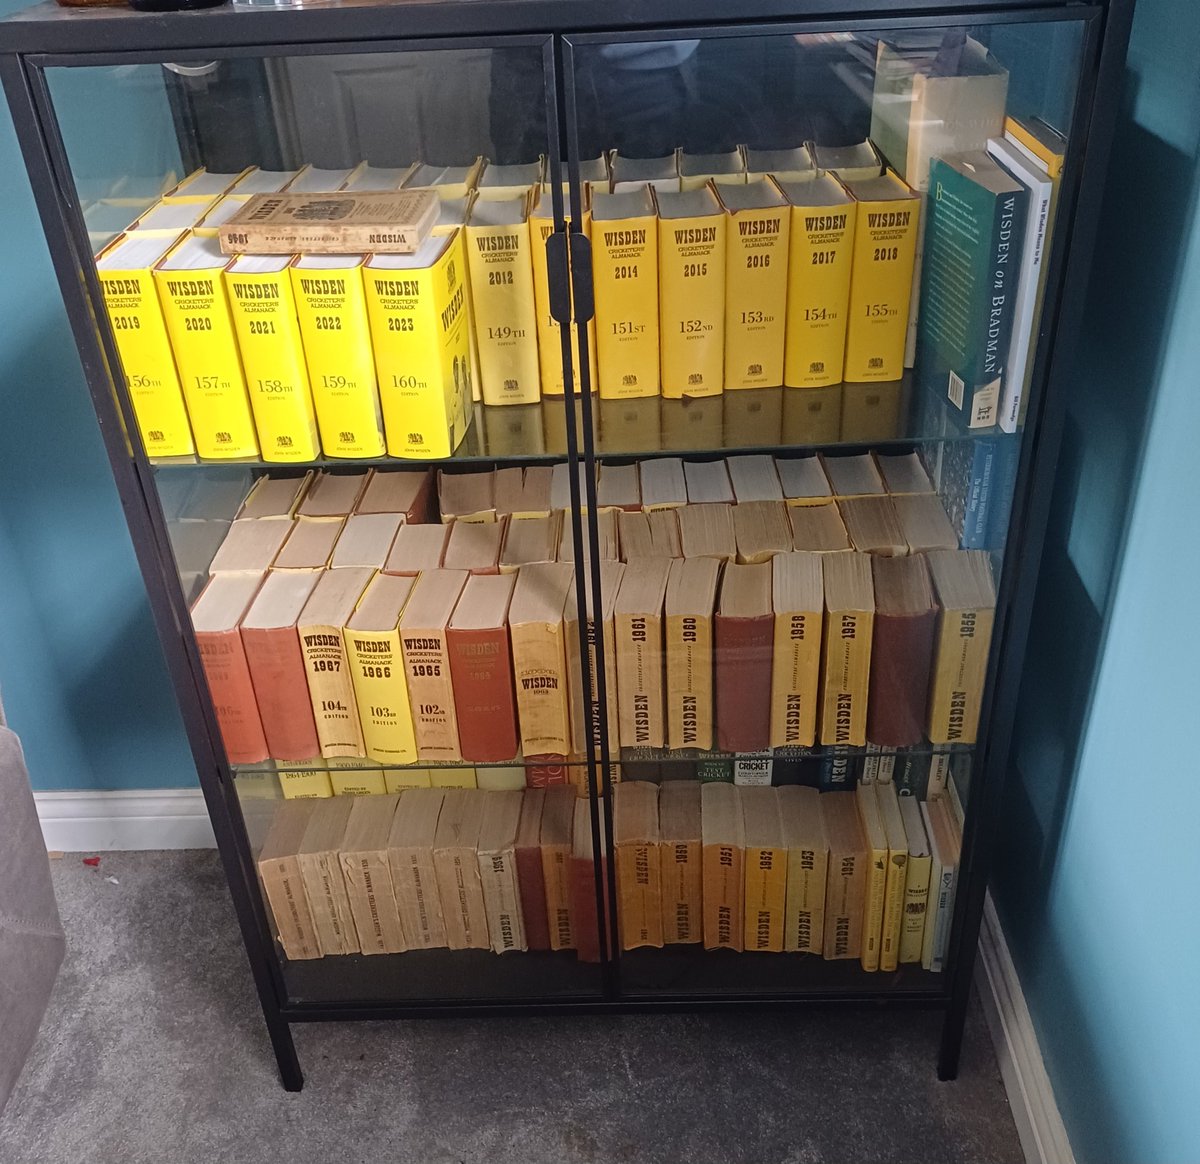 @WisdenAlmanack Got every Almanack since 1945, and a handful from between the wars. Can't wait for a new issue every April - start of the cricket season for me #mywisdencollection